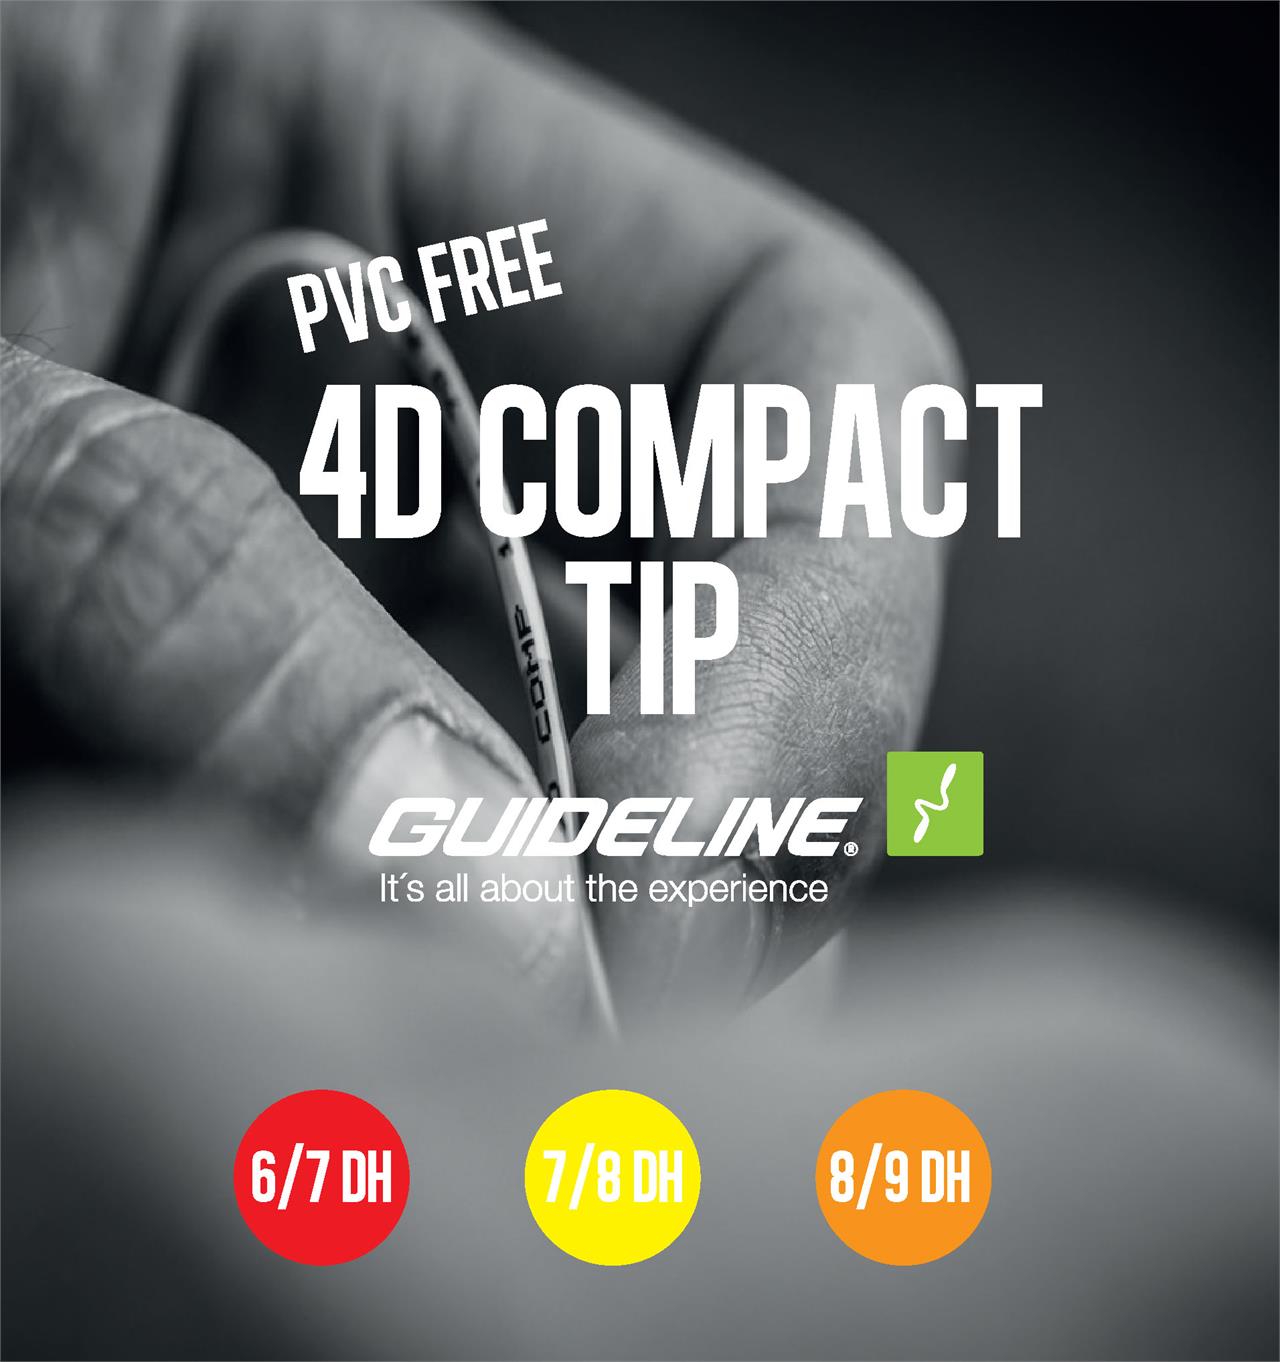 Guideline 4D Compact Tip